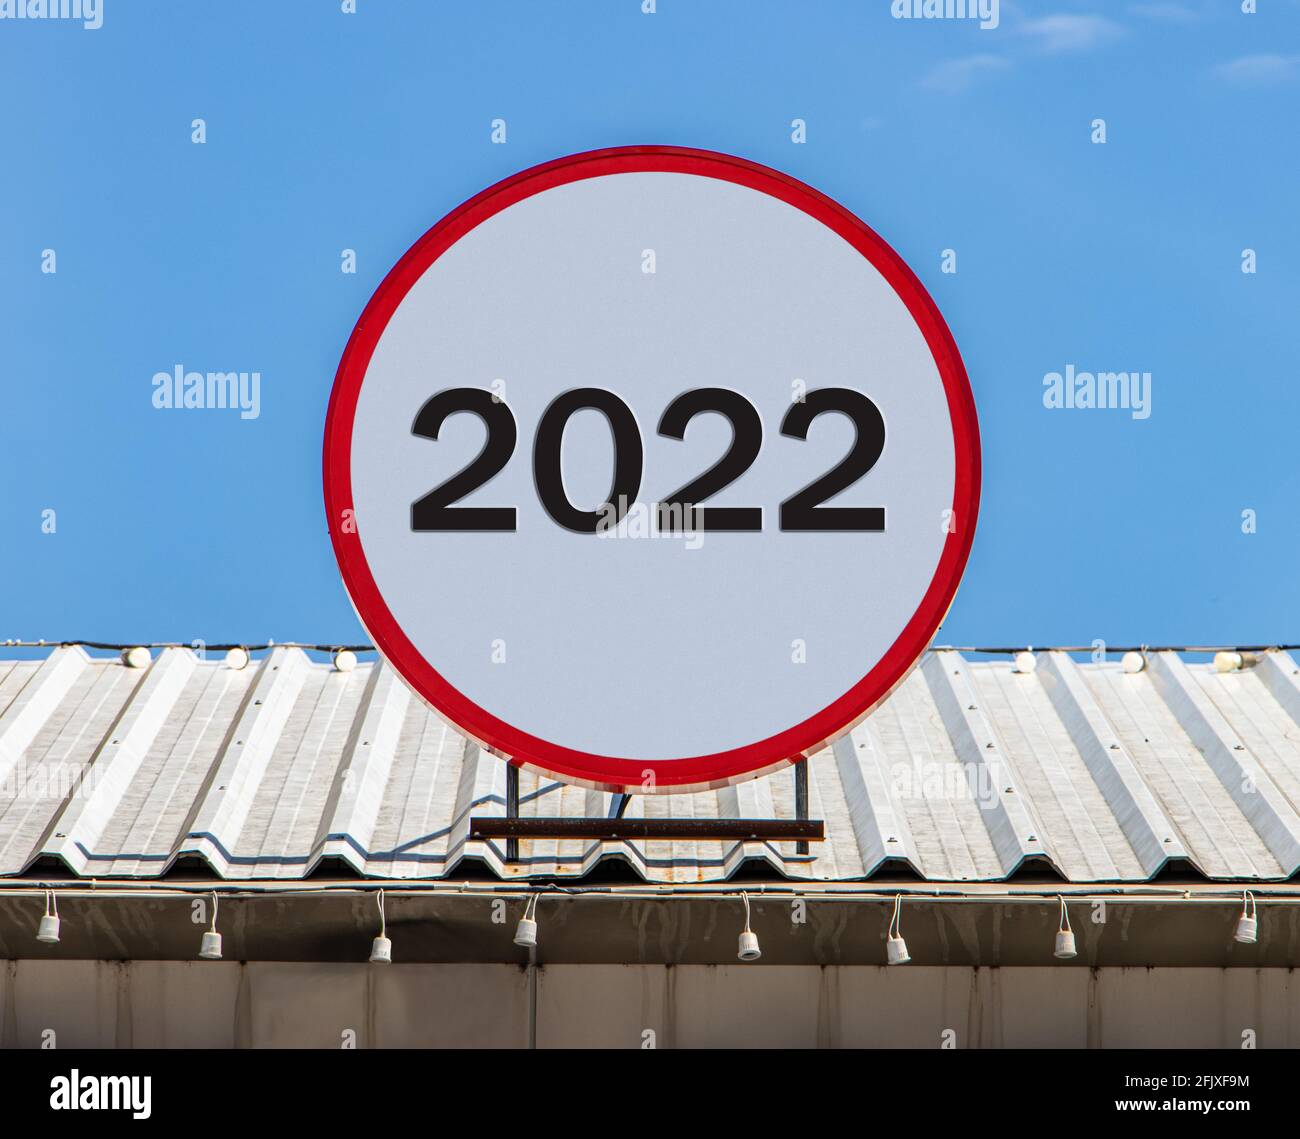 A Circle billboard with number 2022, is installed on a roof. Greeting for New Year 2022. Stock Photo